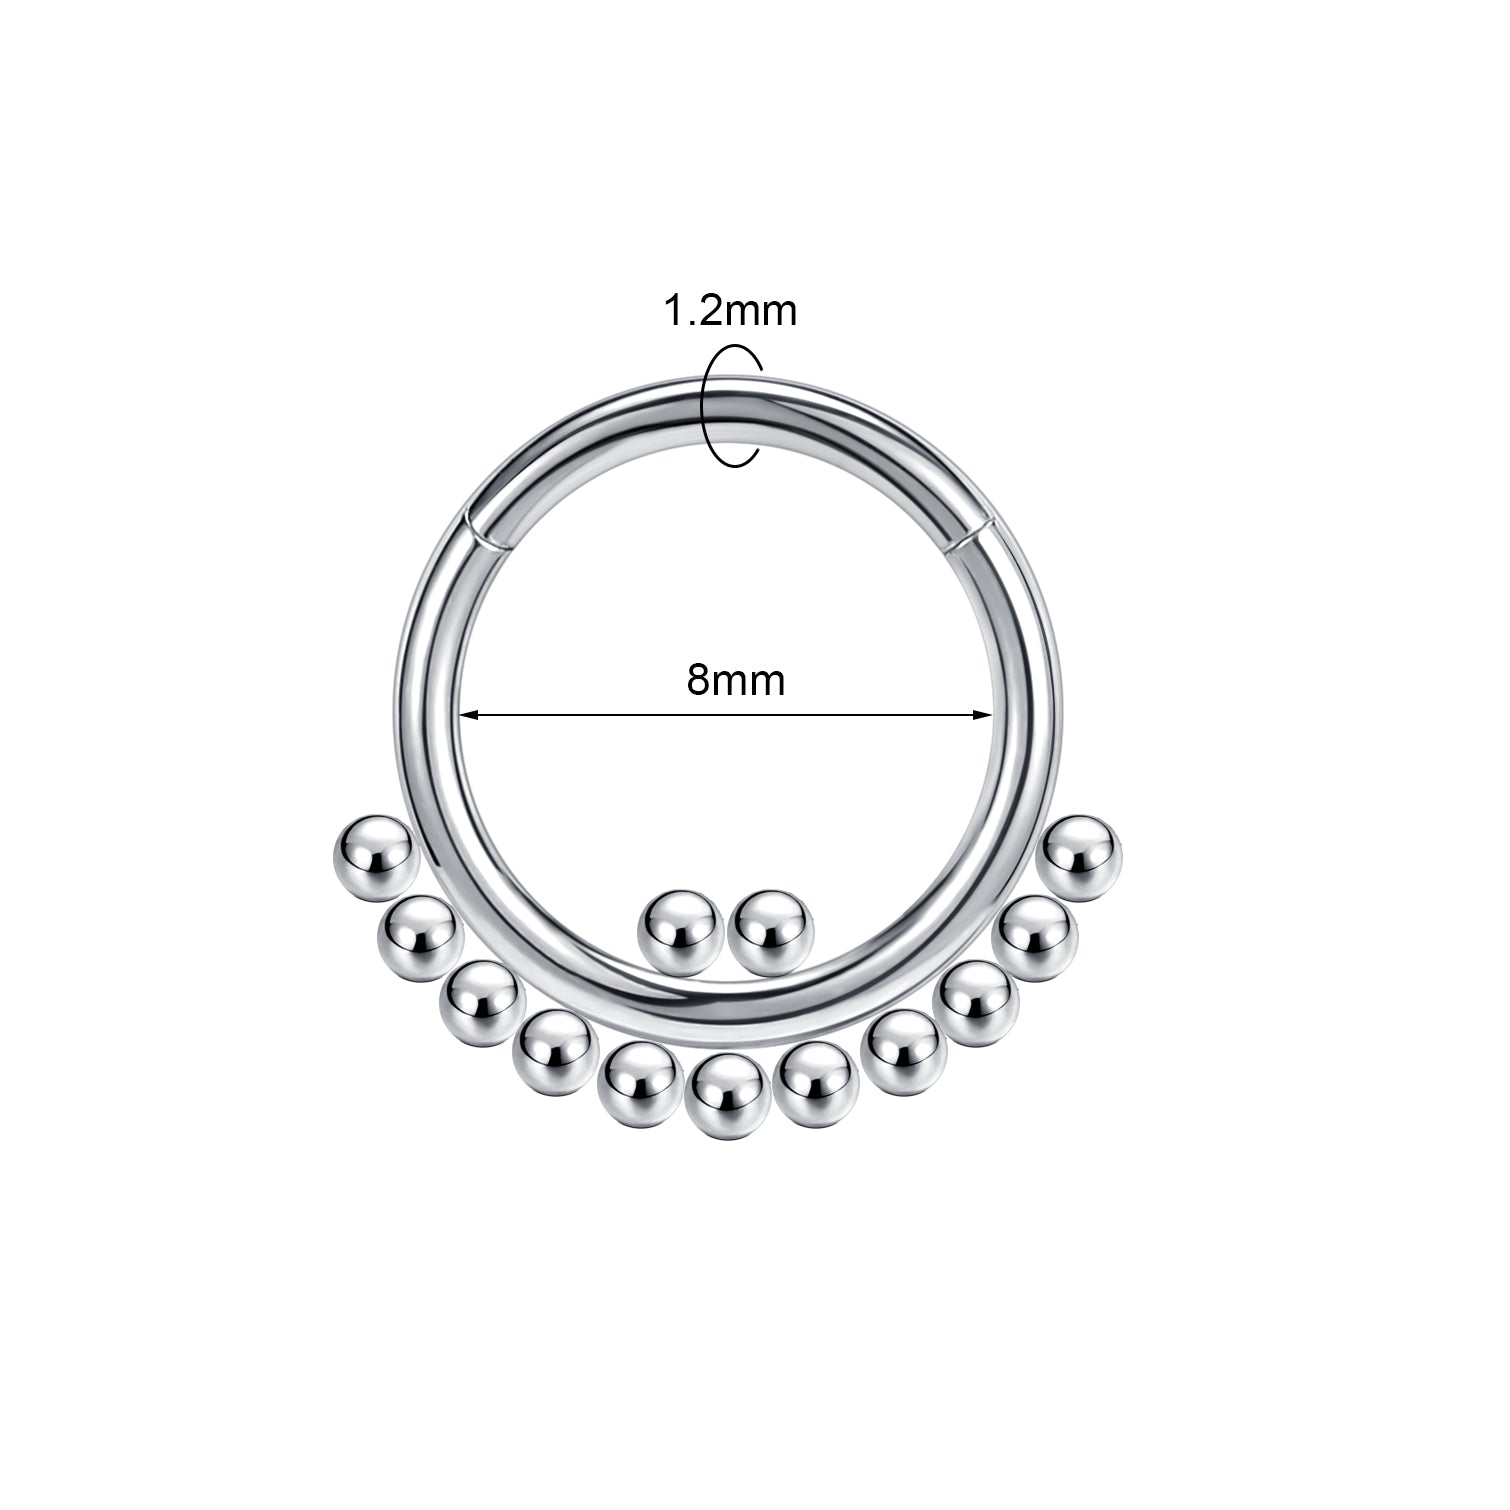 16g-stainless-steel-ball-nose-septum-ring-clicker-cartilage-helix-piercing